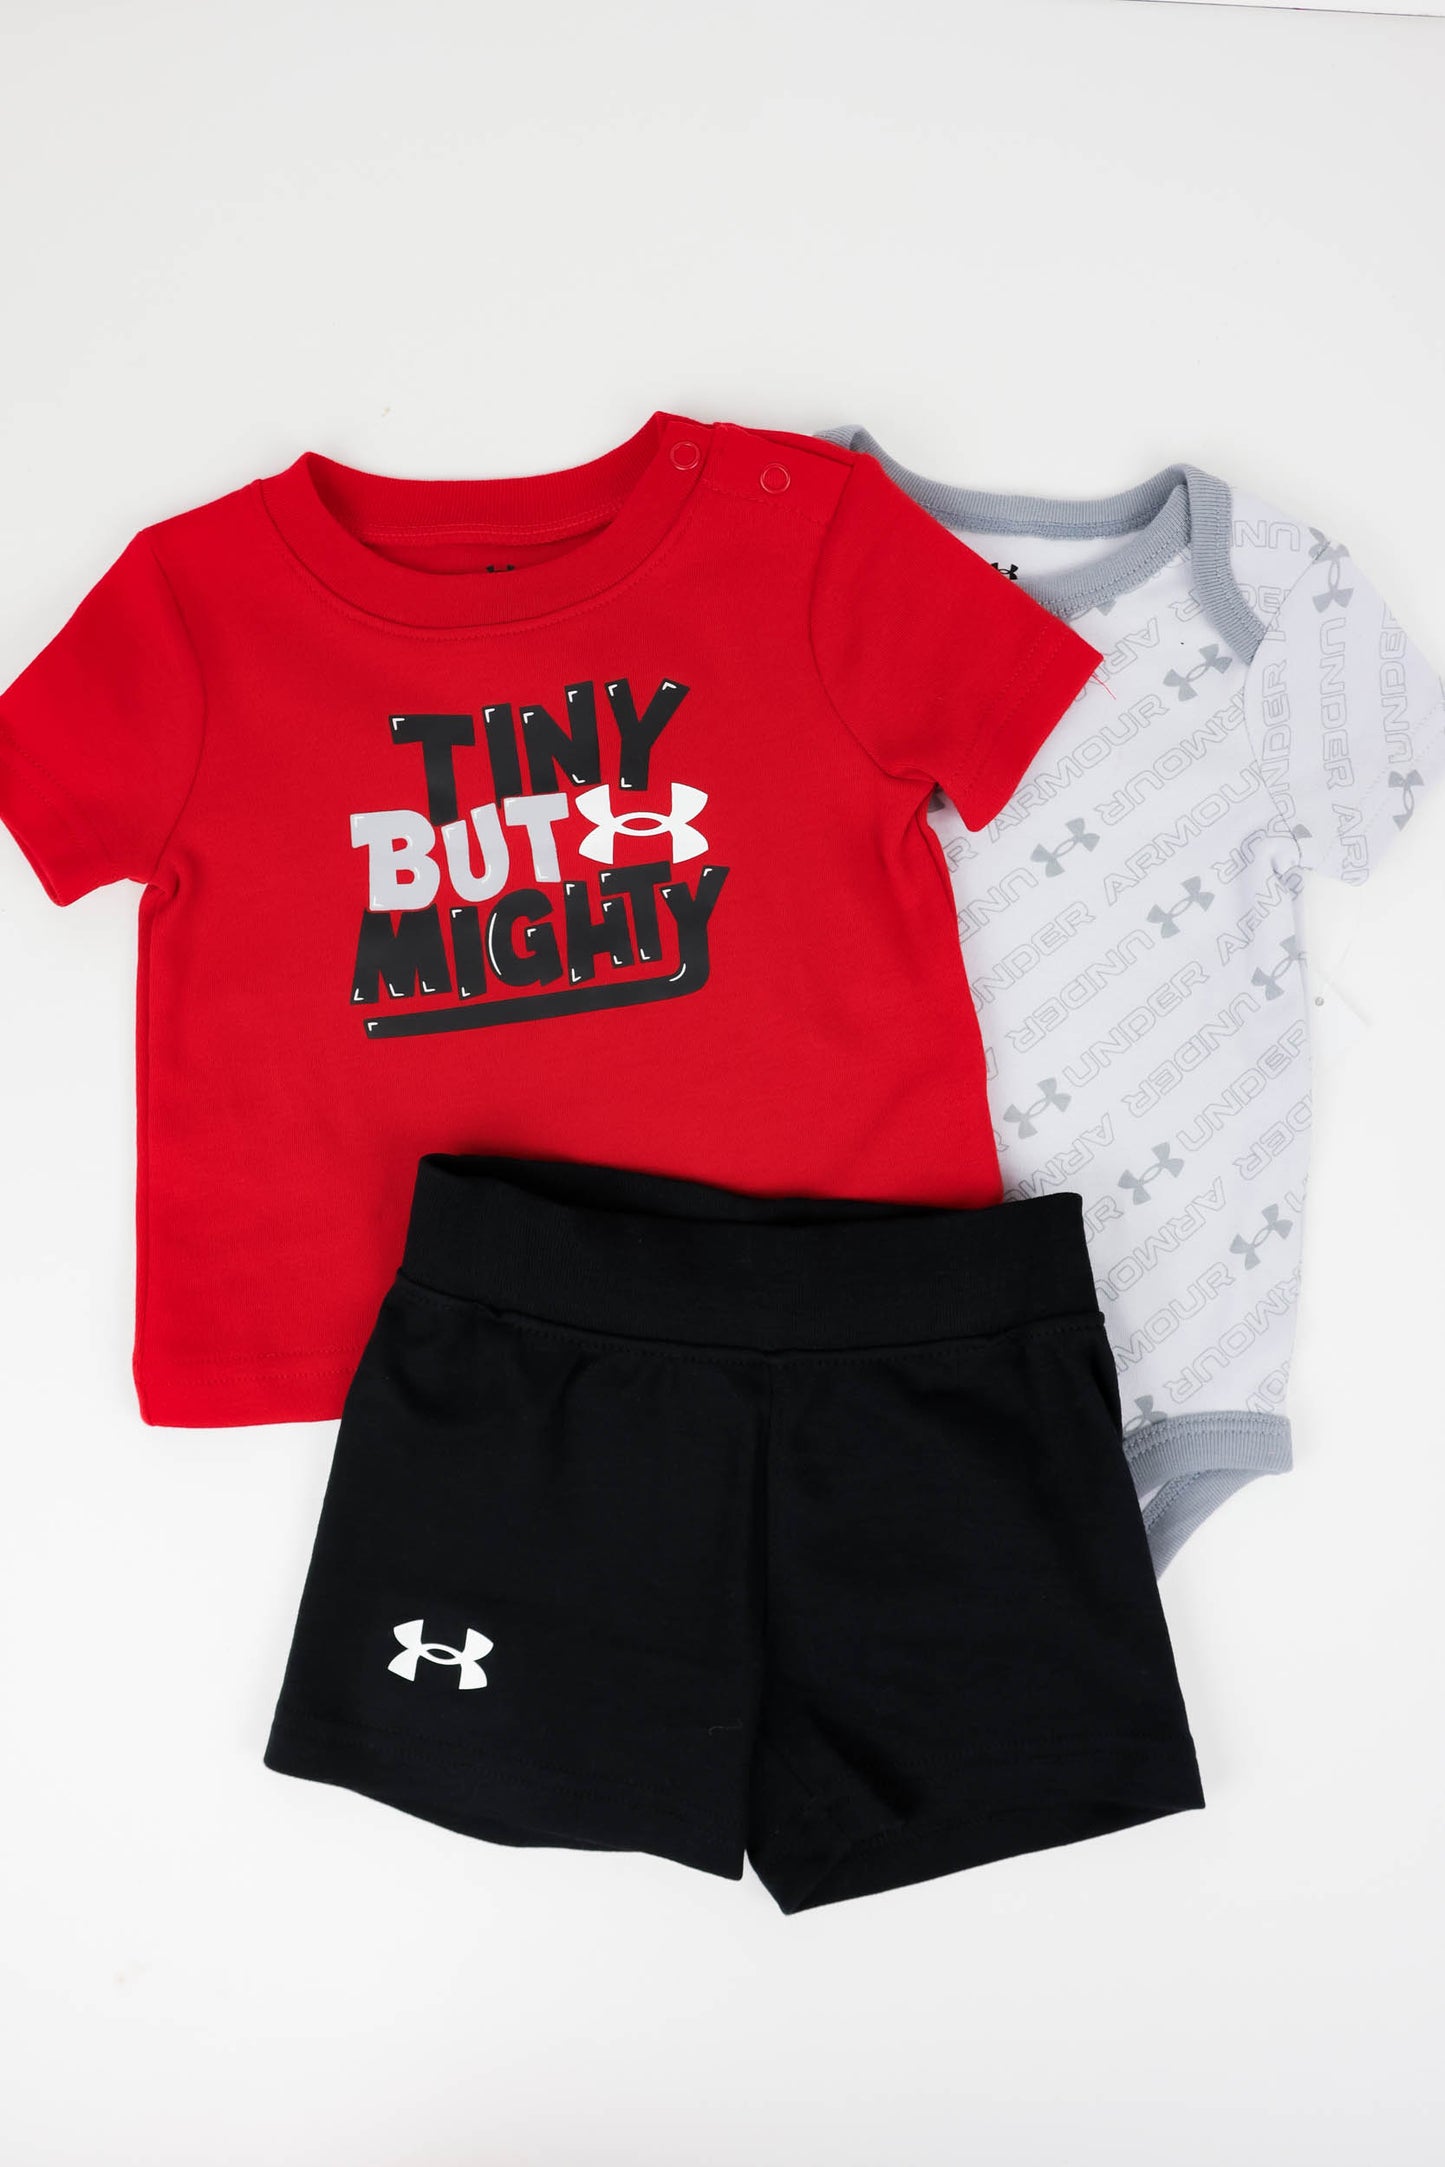 Under Armour Tiny But Might Set | Black/Red